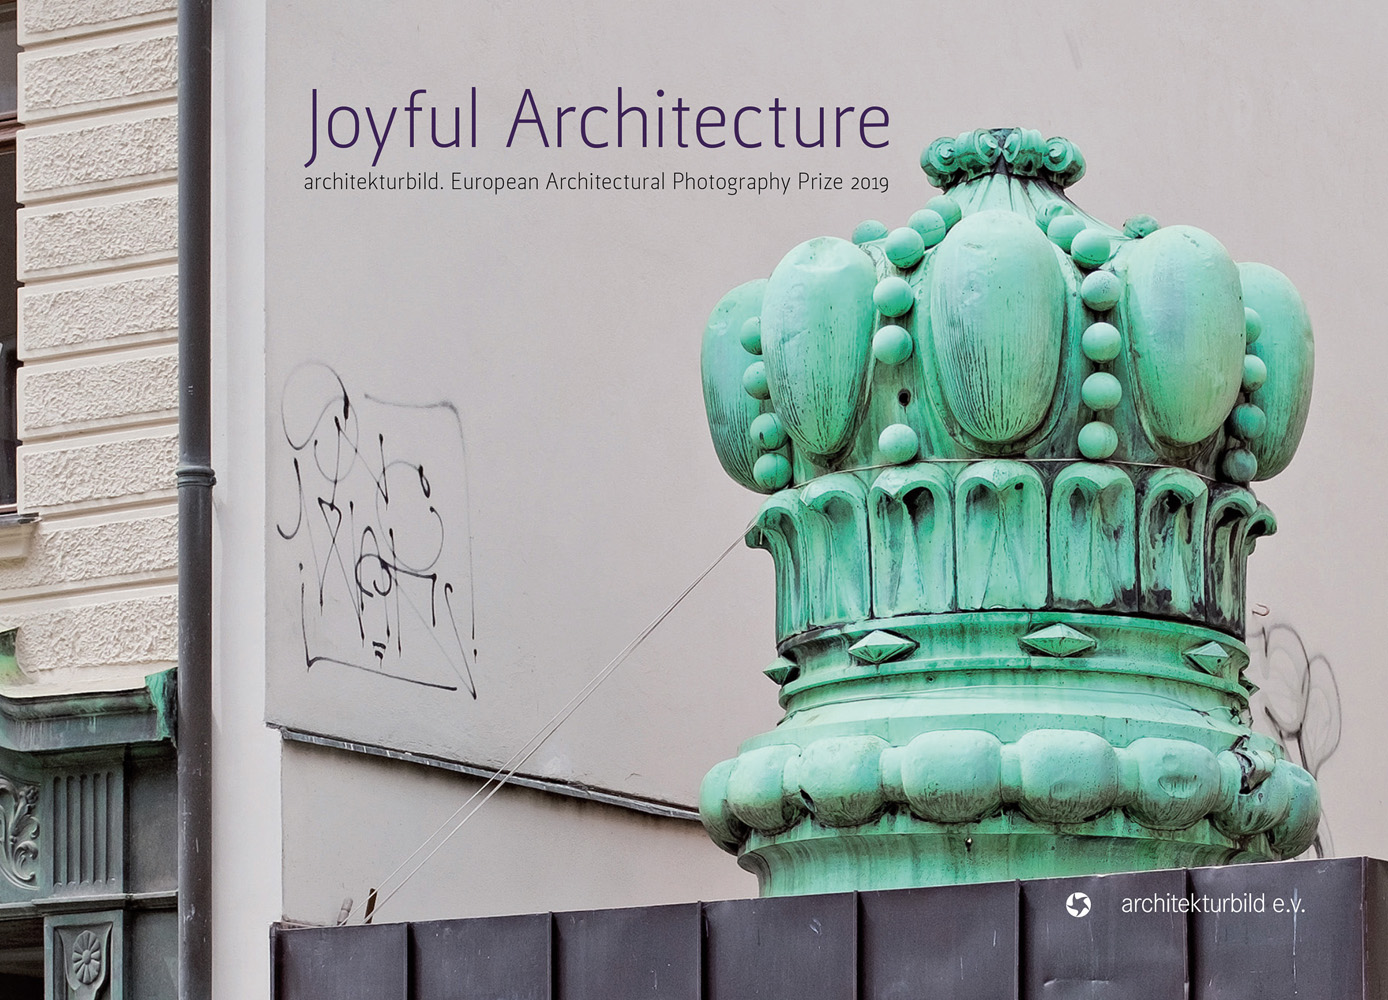 Mint green crown shaped structure tied down with rope, next to street building, on landscape cover of 'Joyful Architecture, European Architectural Photography Prize 2019', by Avedition Gmbh.